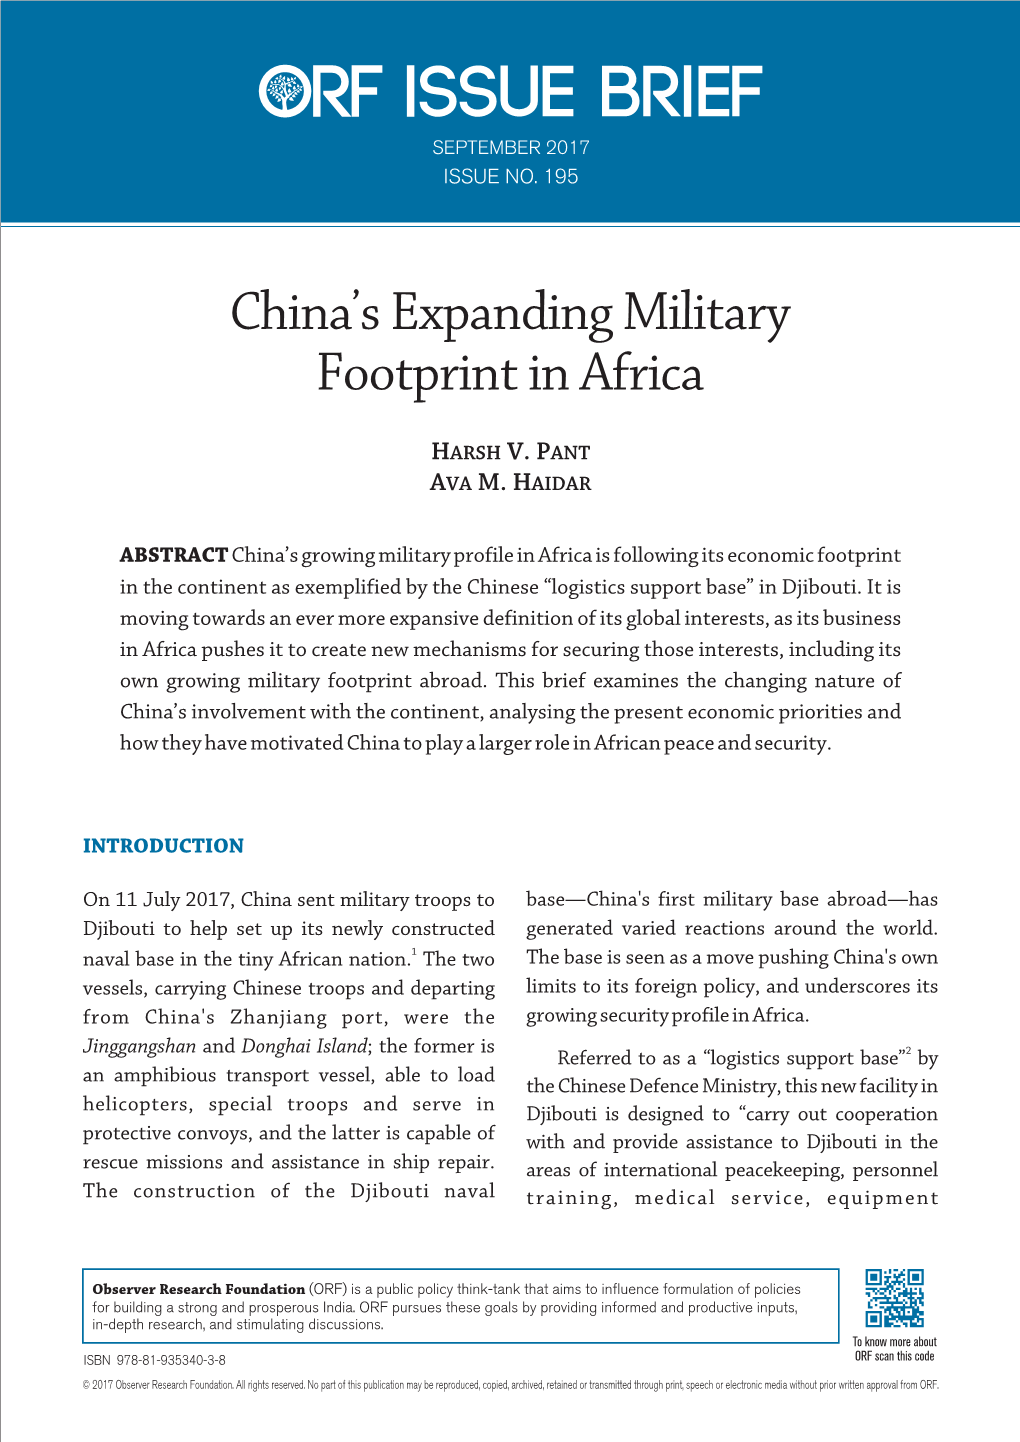 China's Expanding Military Footprint in Africa